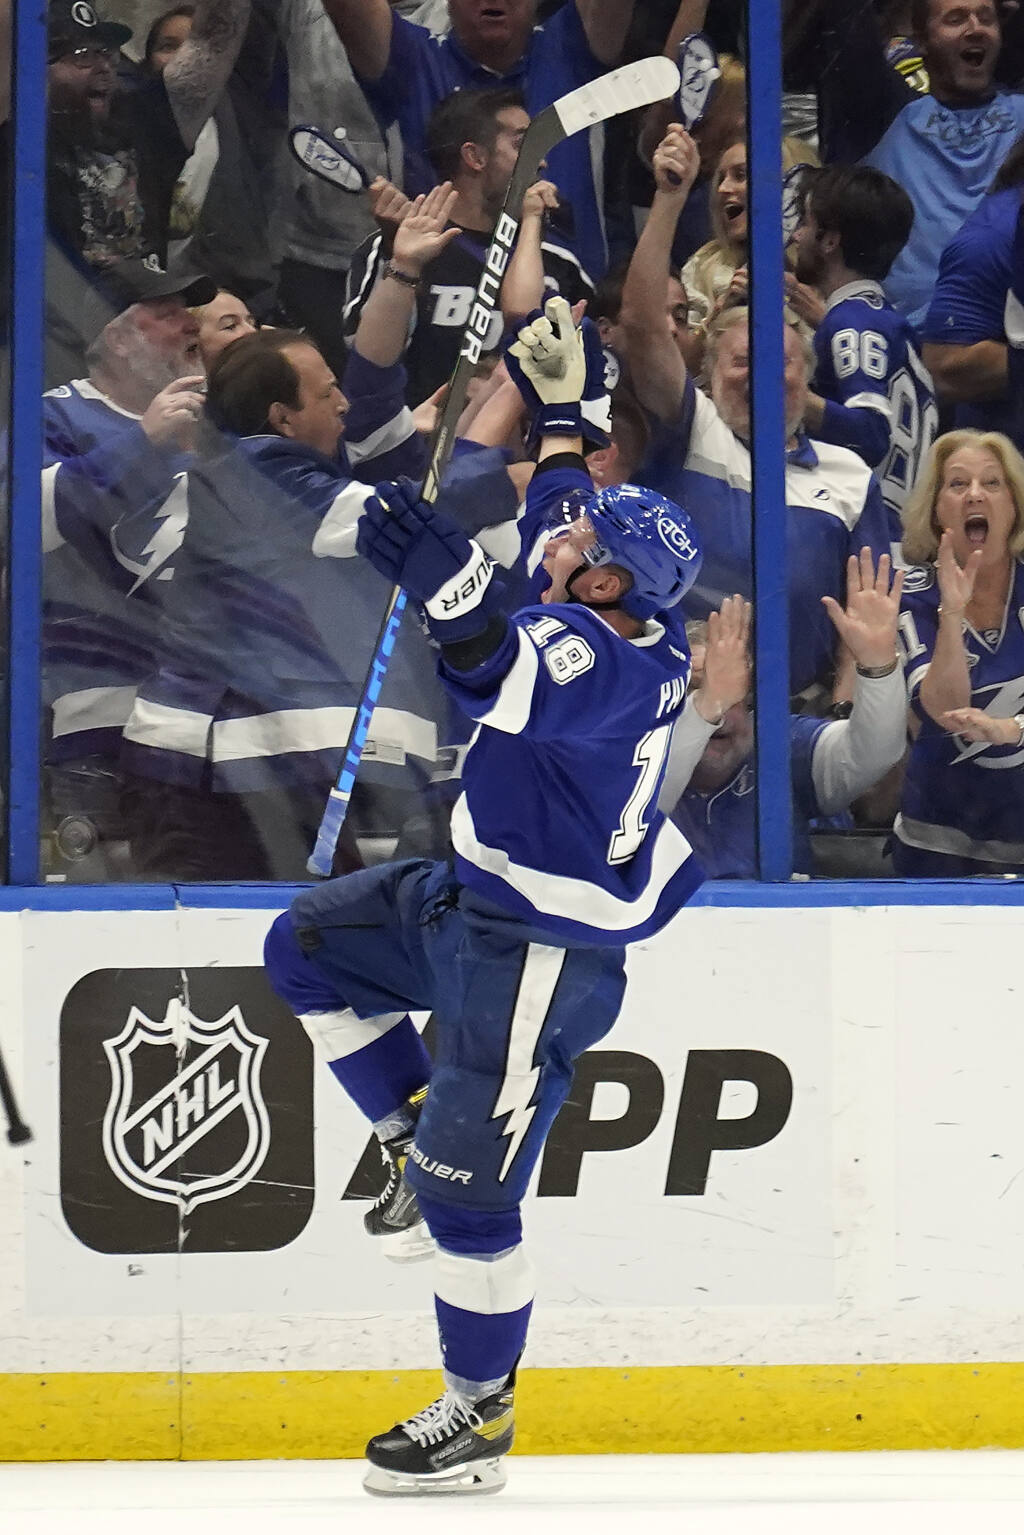 Palat's latest game-winner keeps Lightning alive in Game Five win